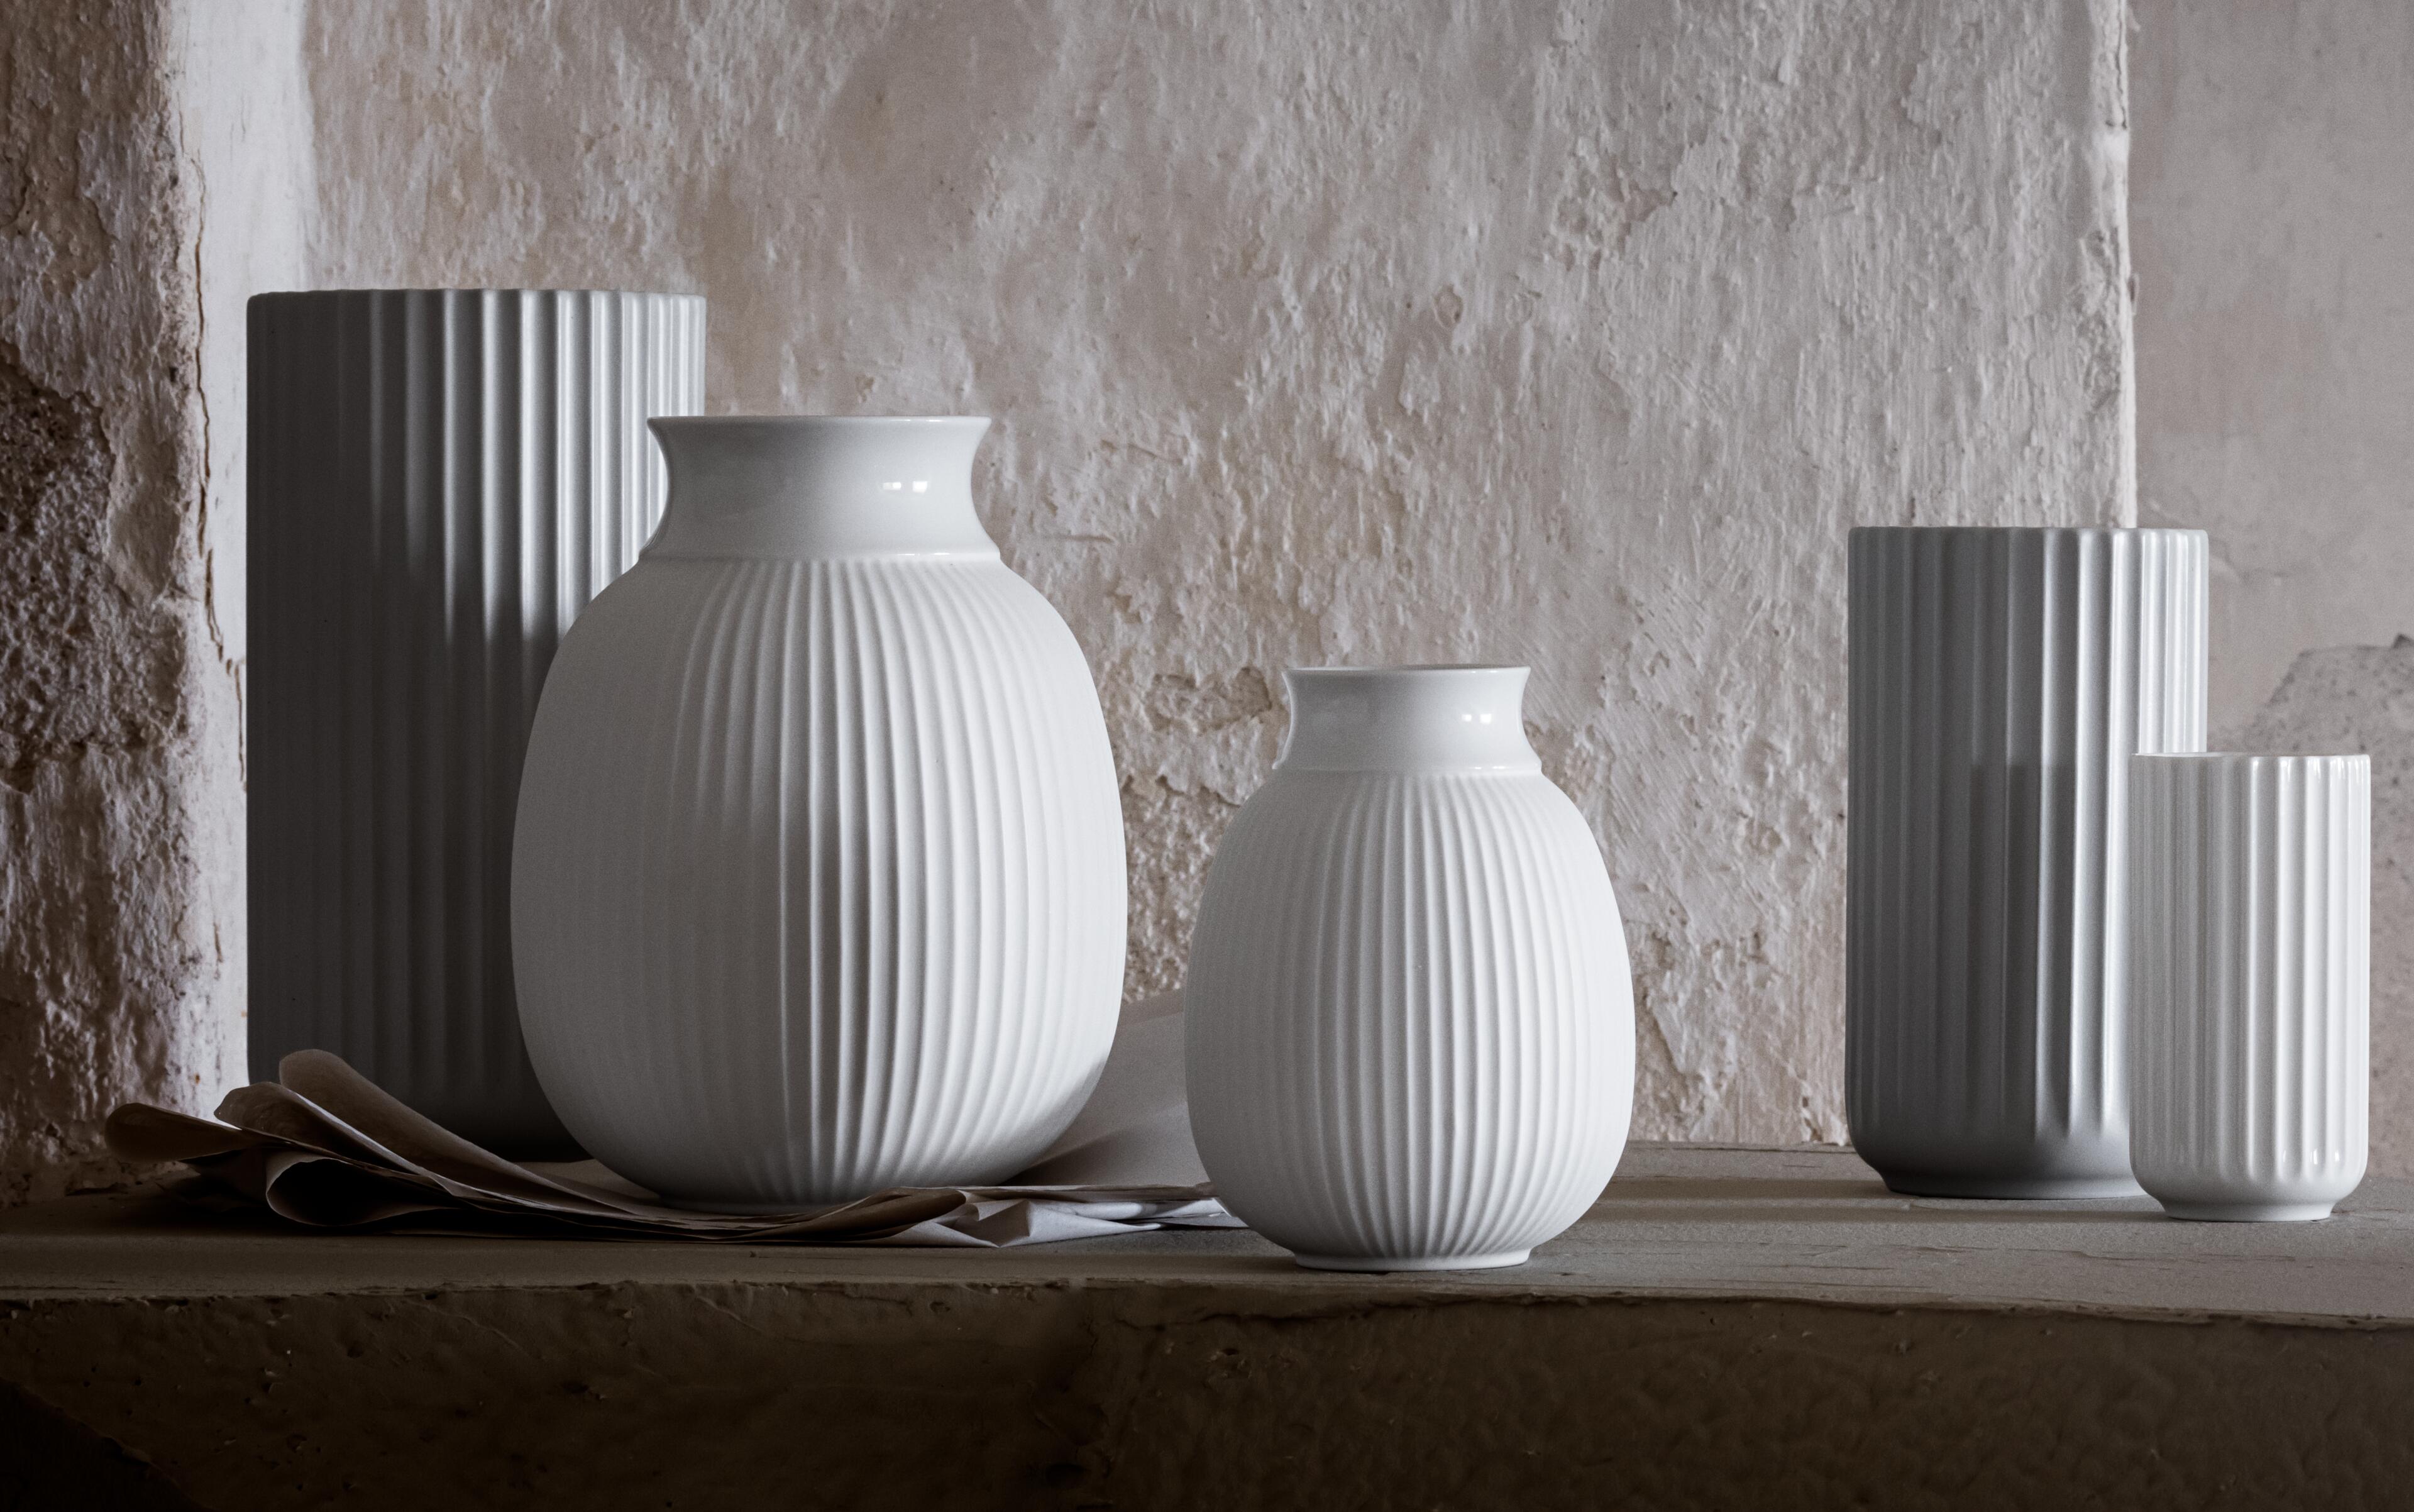 Curve vases in two sizes and Lyngby vases from Lyngby Porcelæn